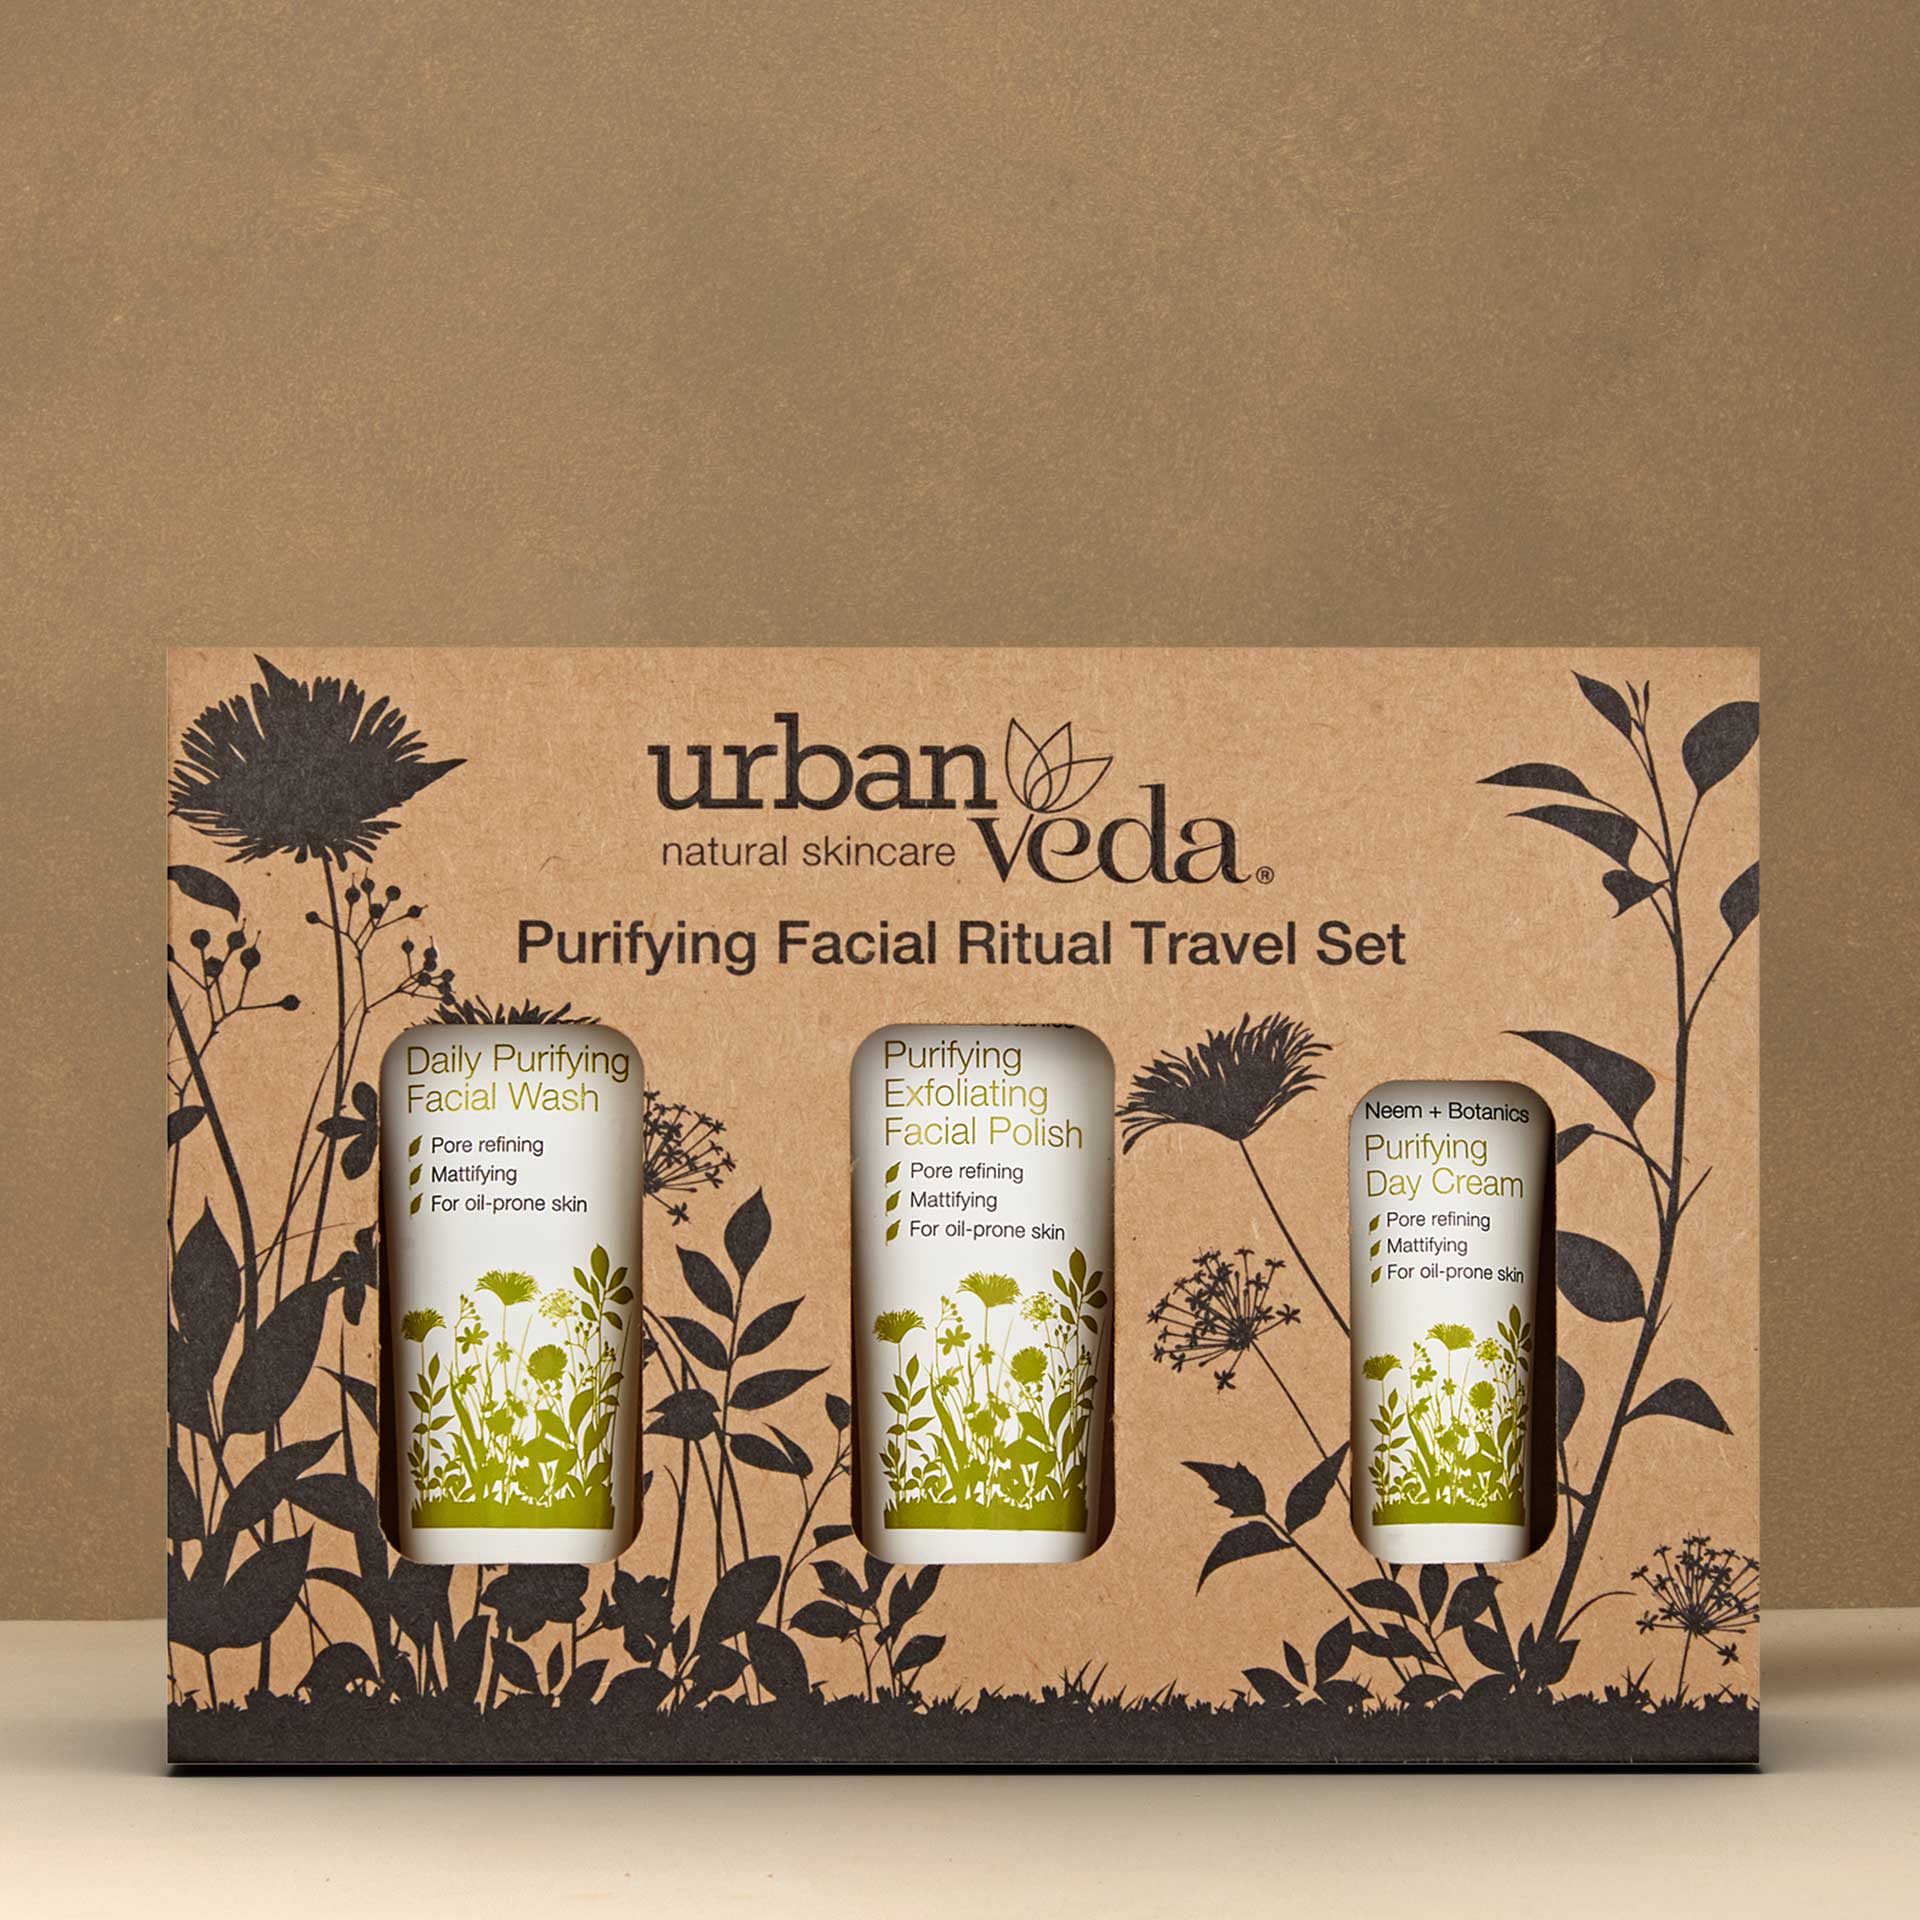 Purifying Body Ritual Travel Set hover image